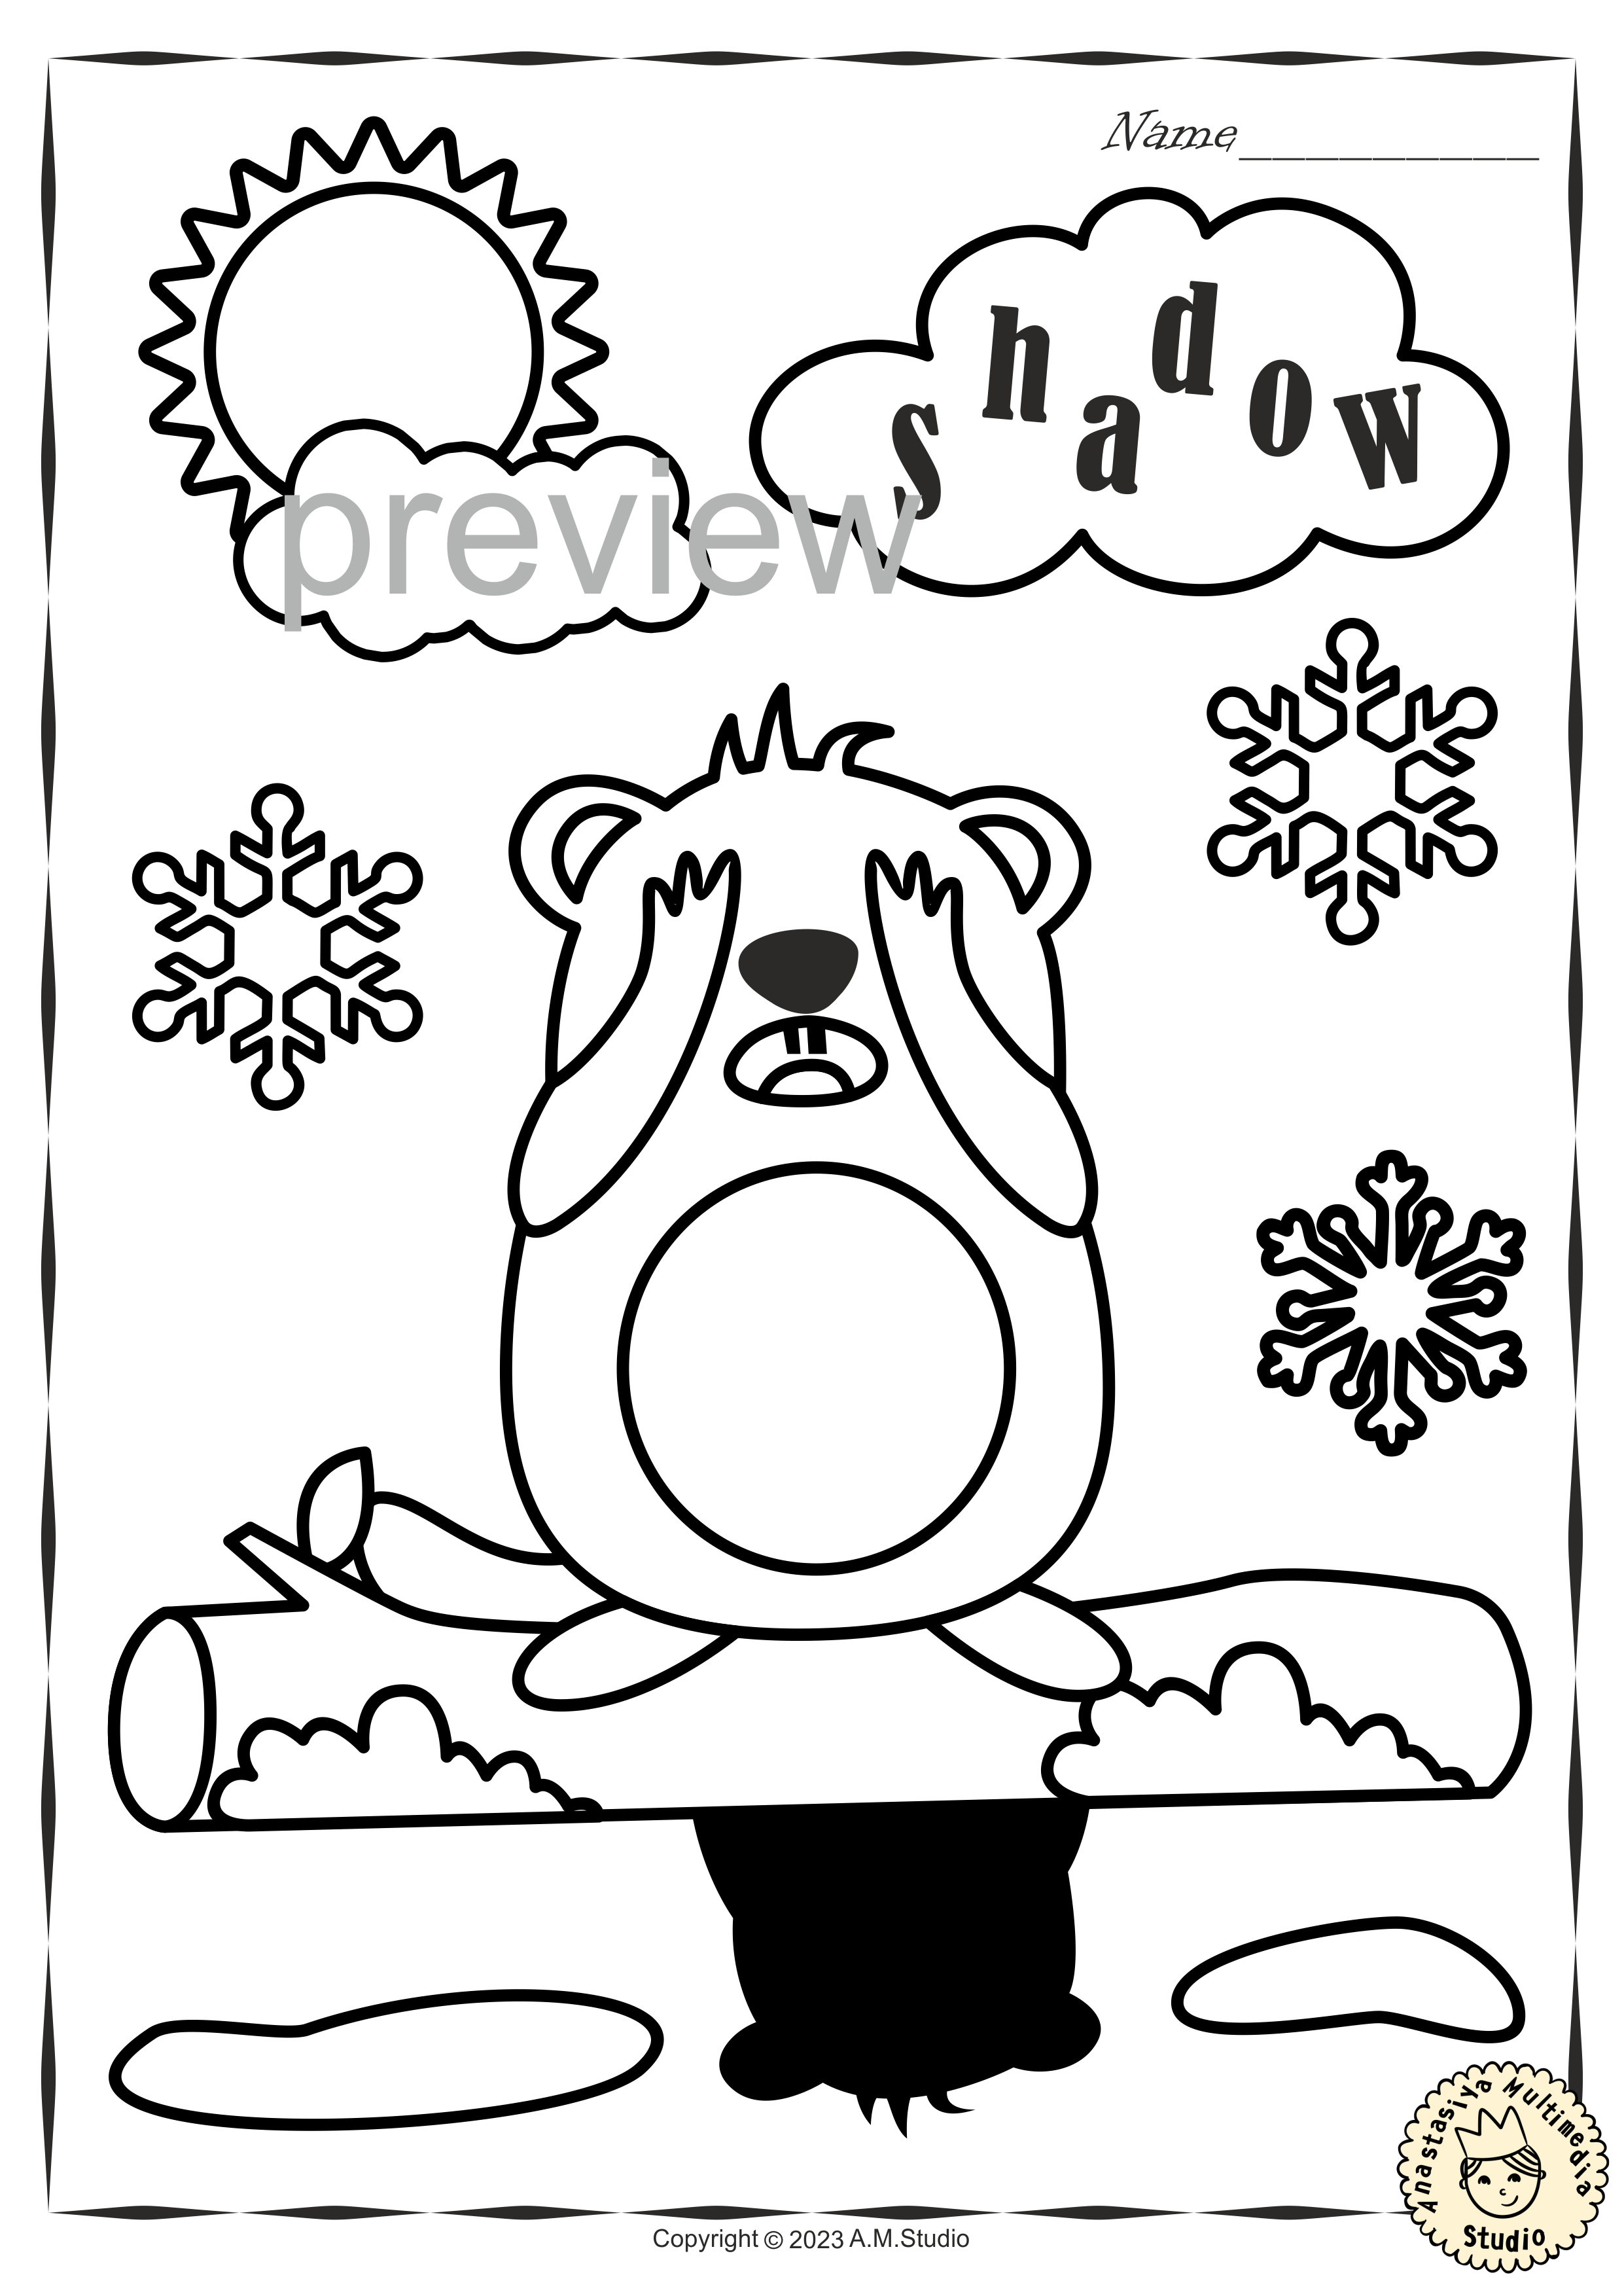 Groundhog Day Printable Coloring Pages for Children (img # 2)